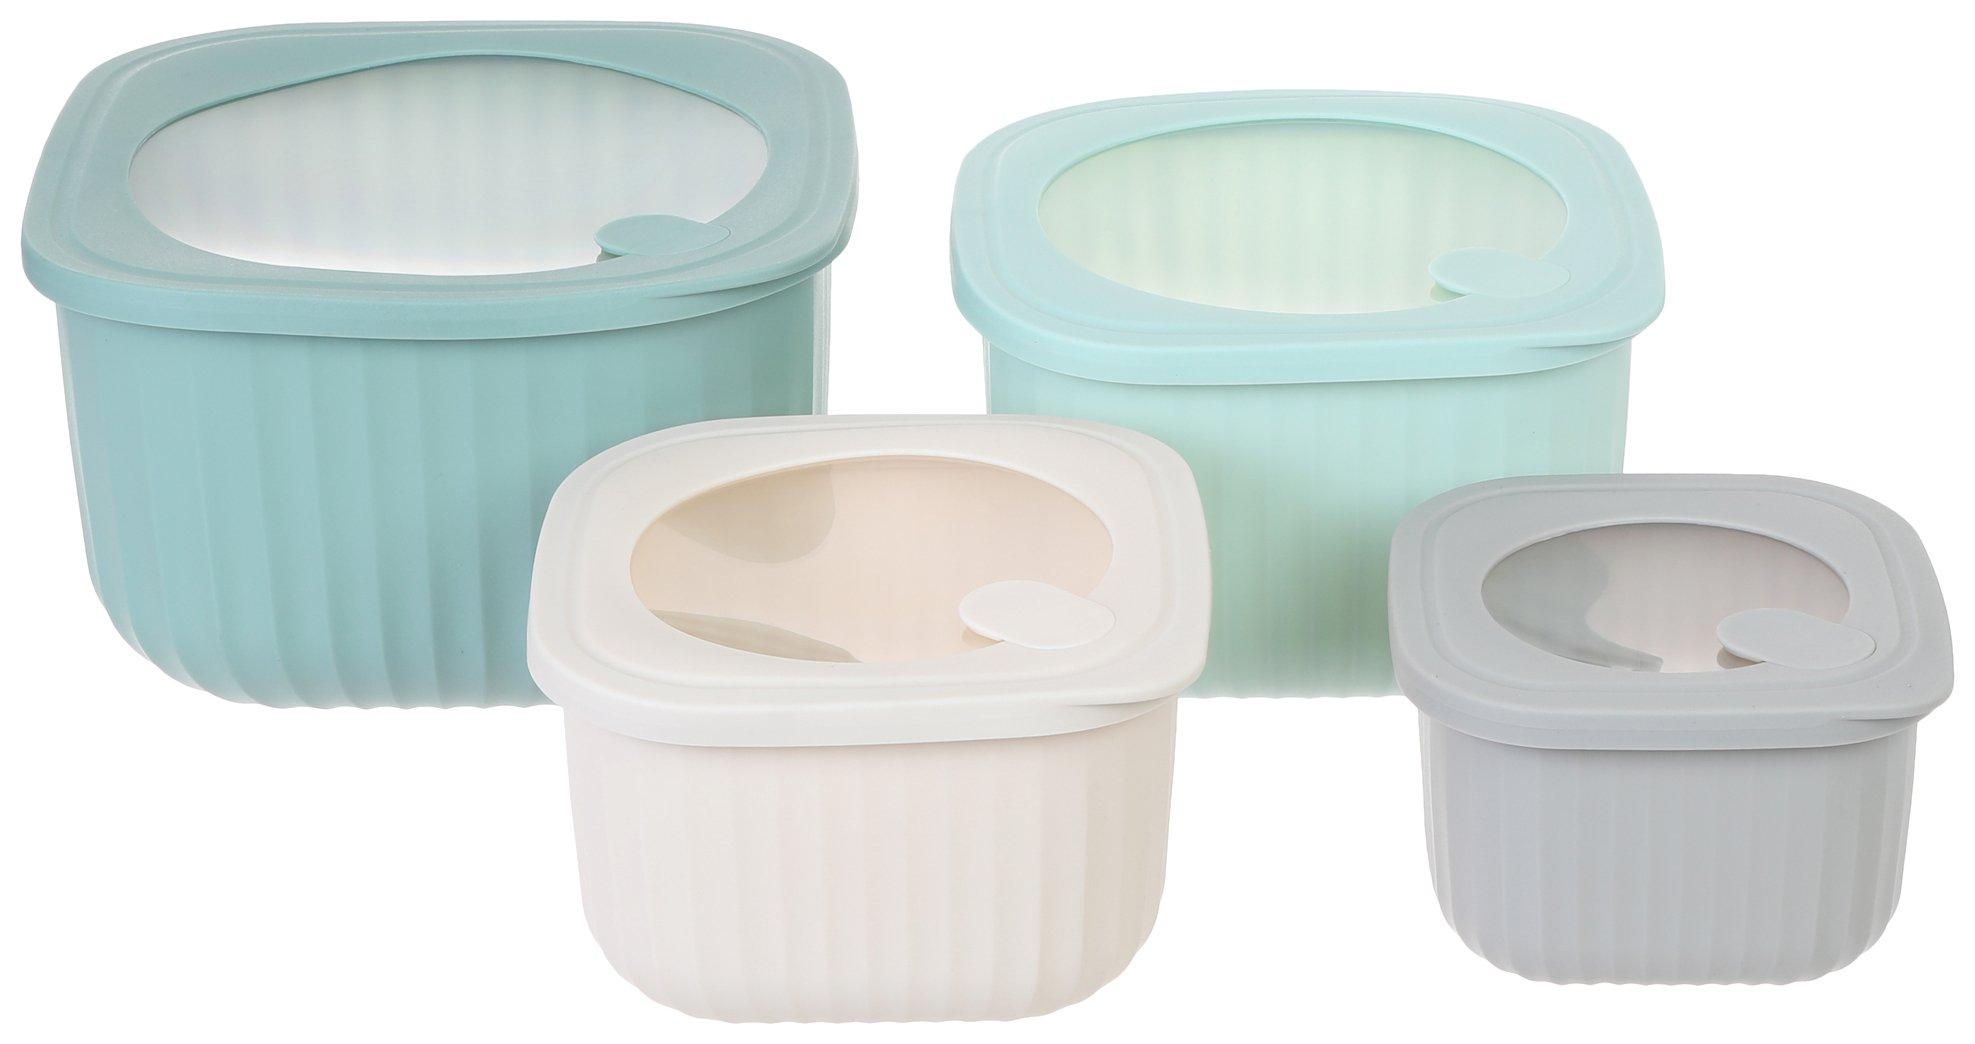 8 Pc Mixing Bowls Set With Vented Lids